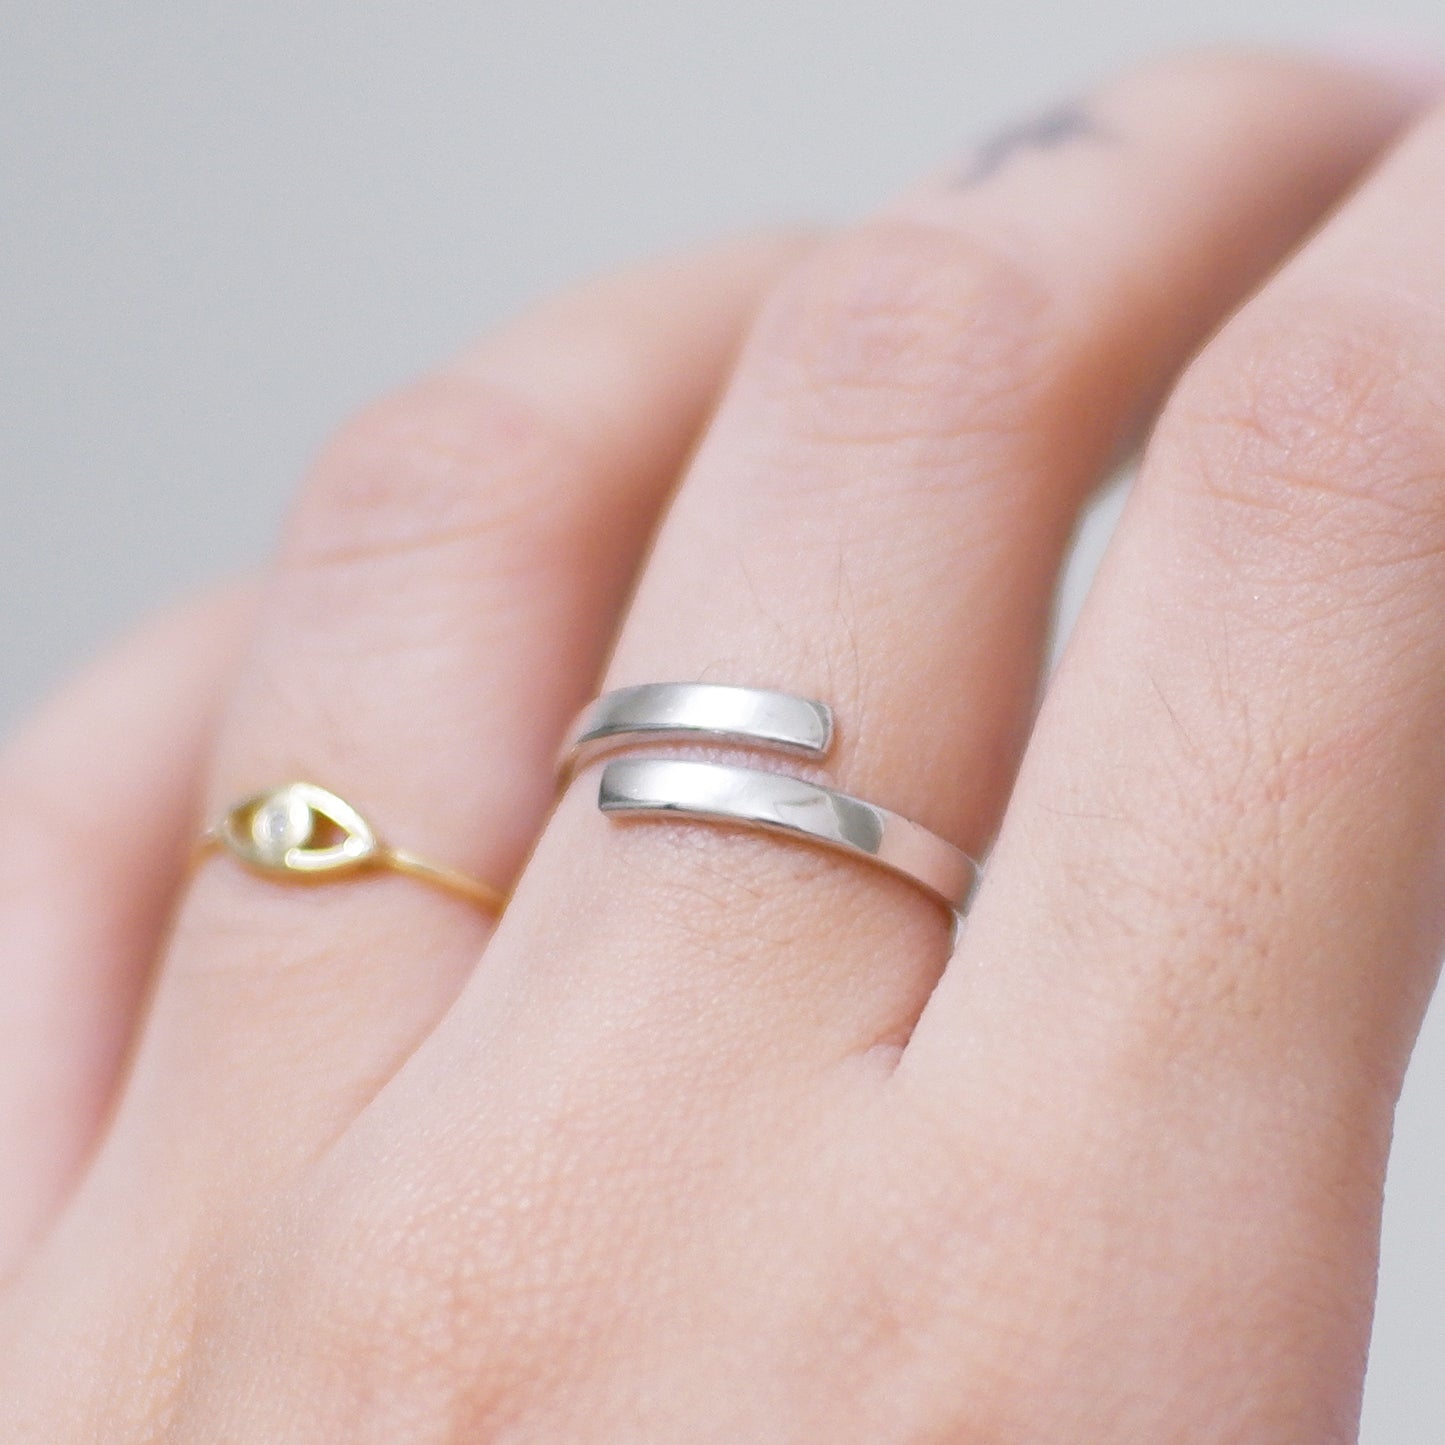 The Wrap Ring in Solid Gold